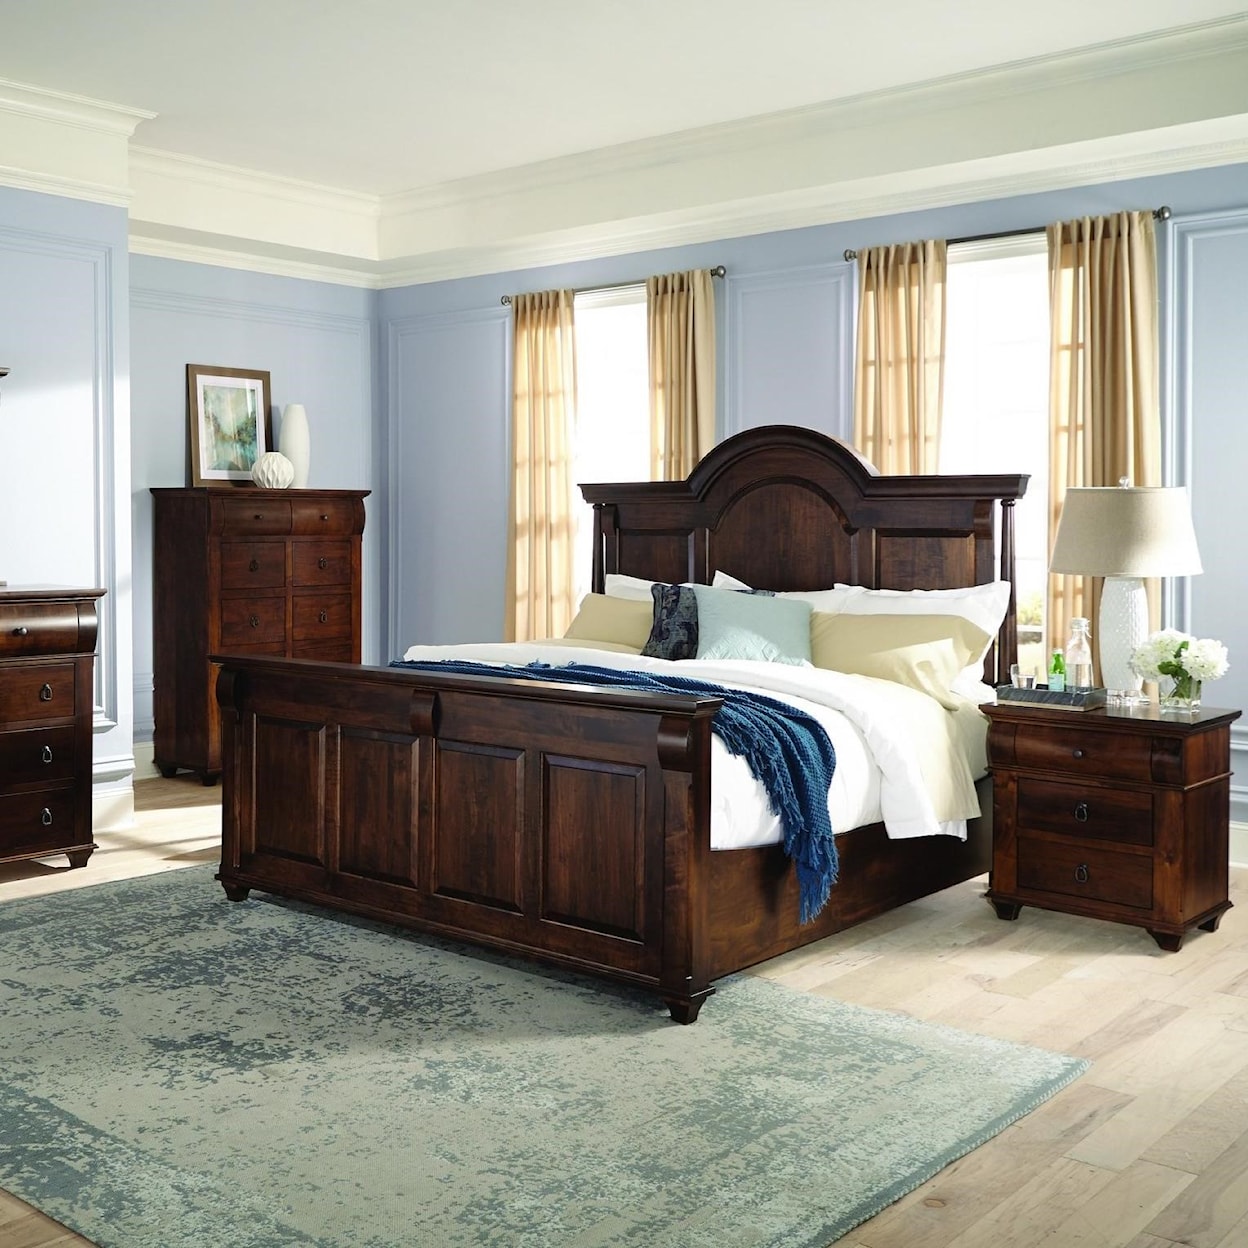 Mavin Bartletts Island Queen Arched Panel Bed